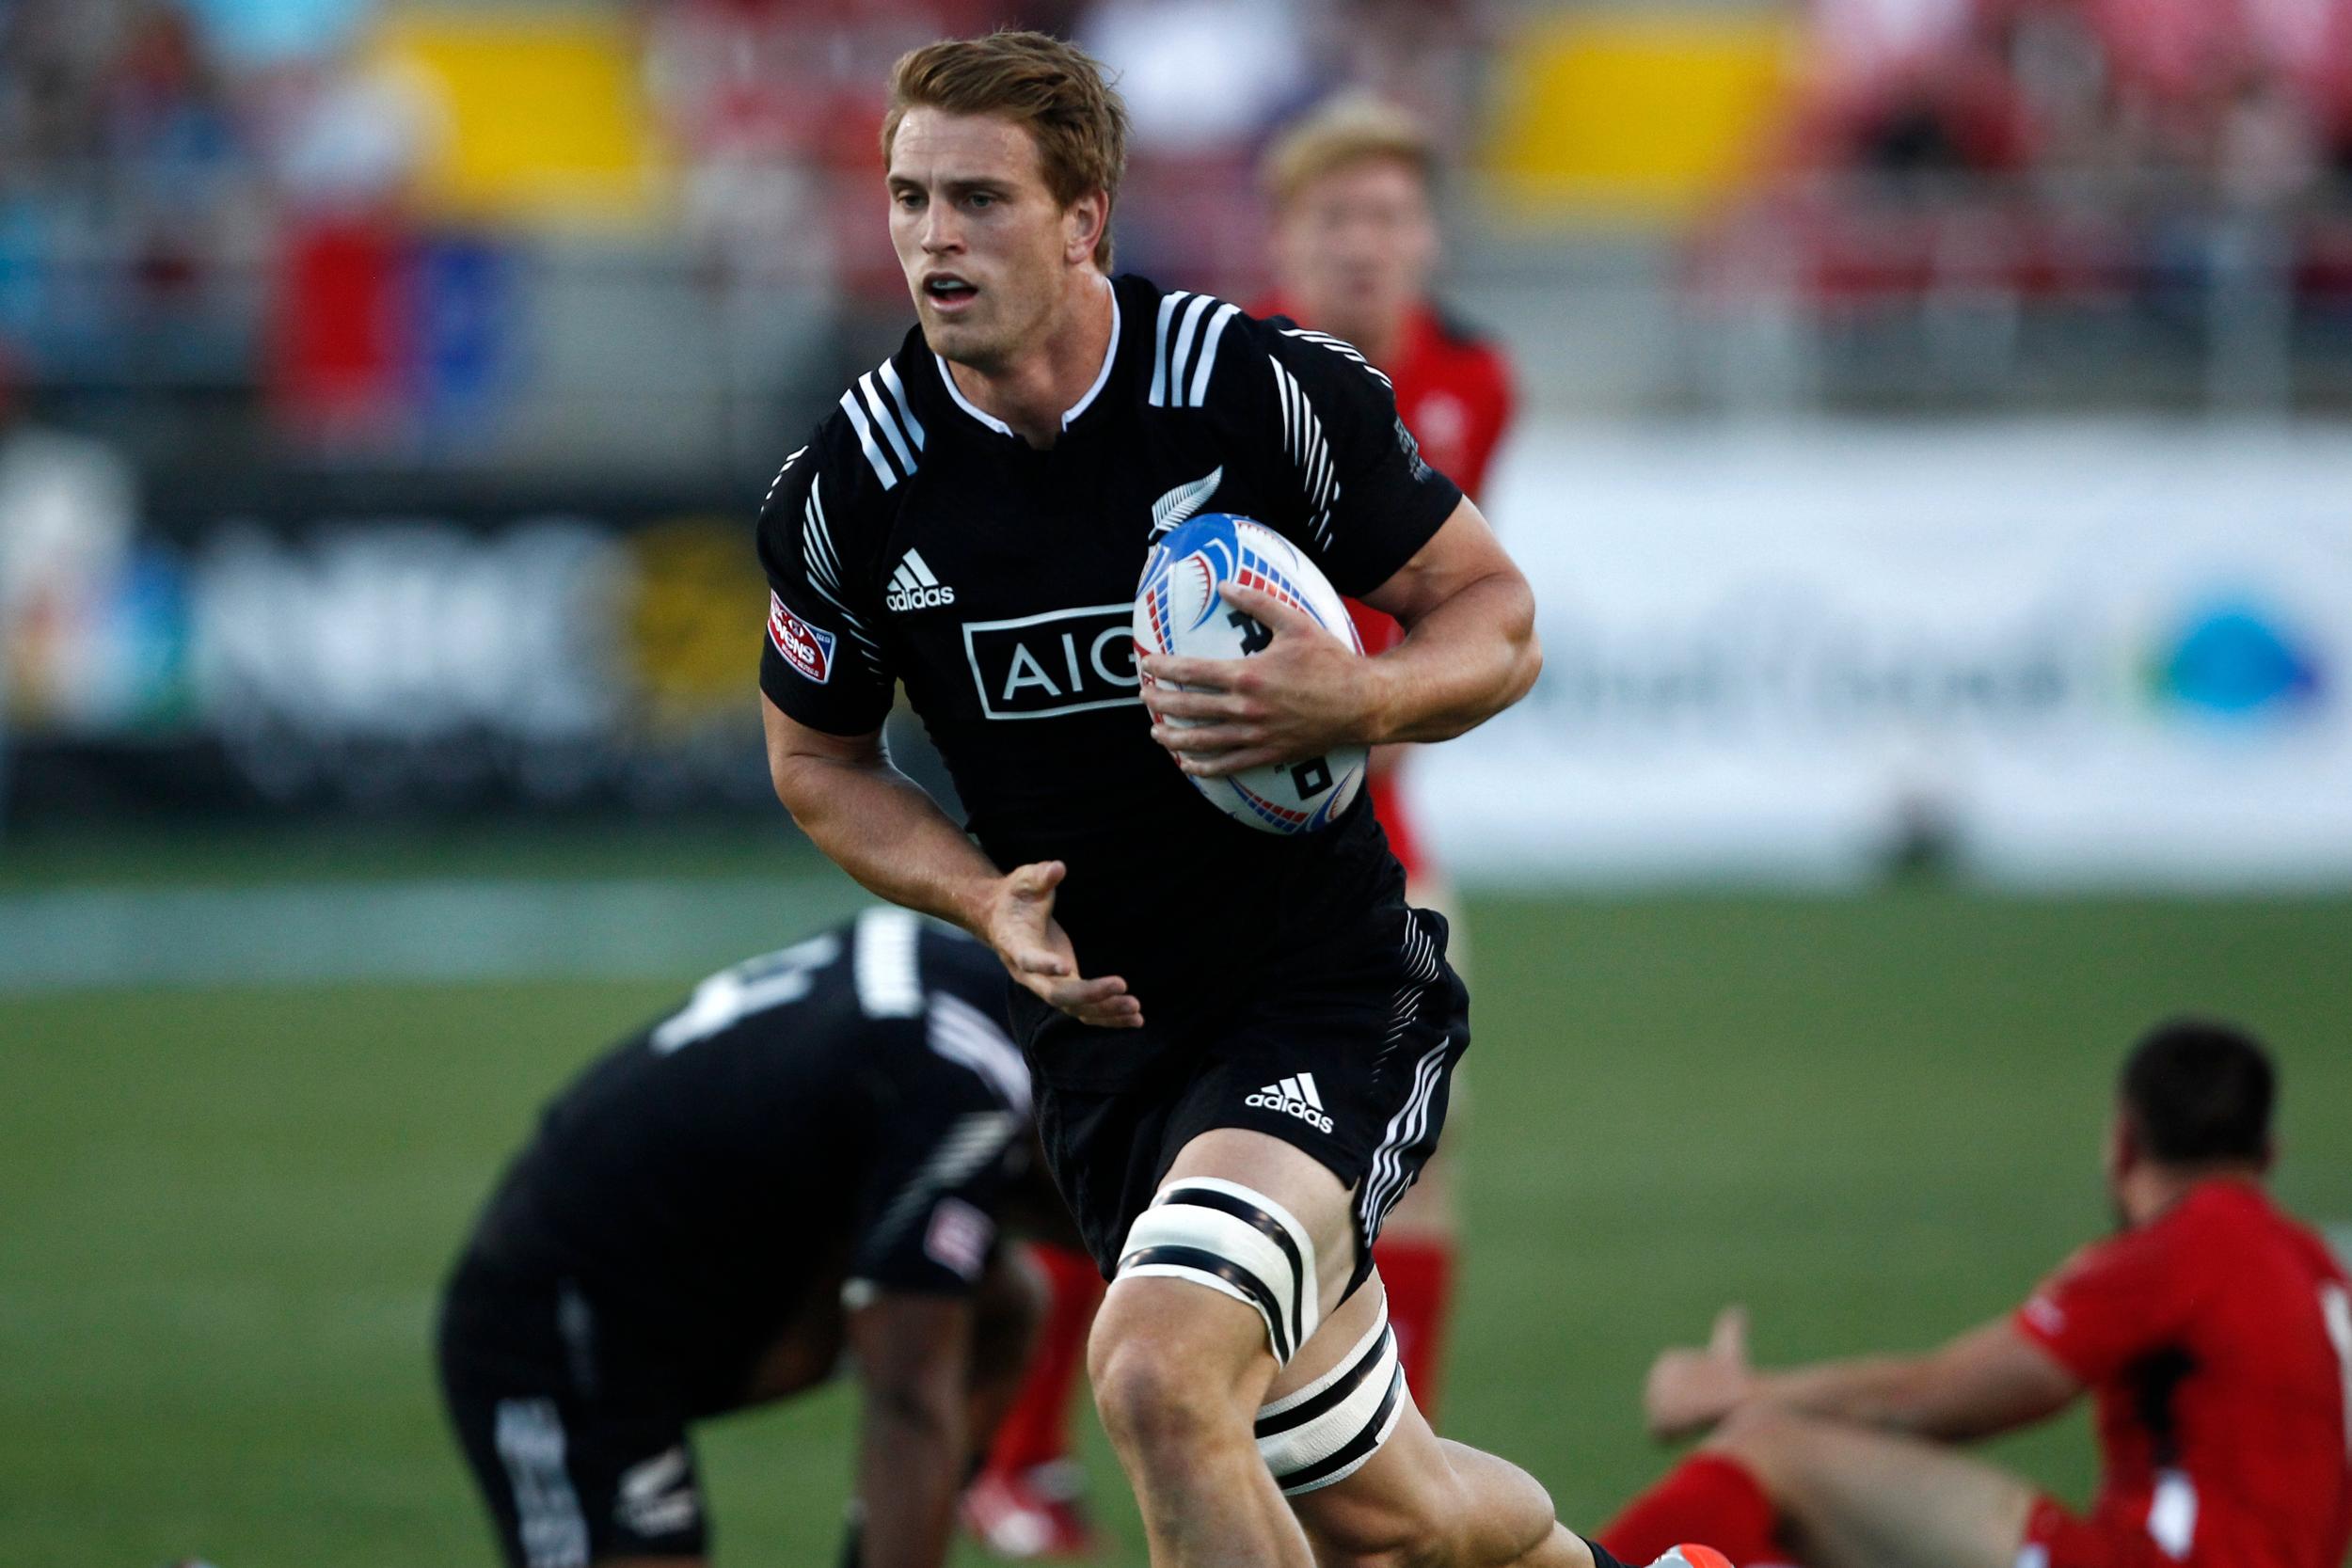 New Zealand fresh from winning their home series progressed to the quarter finals in Las Vegas ©World Rugby